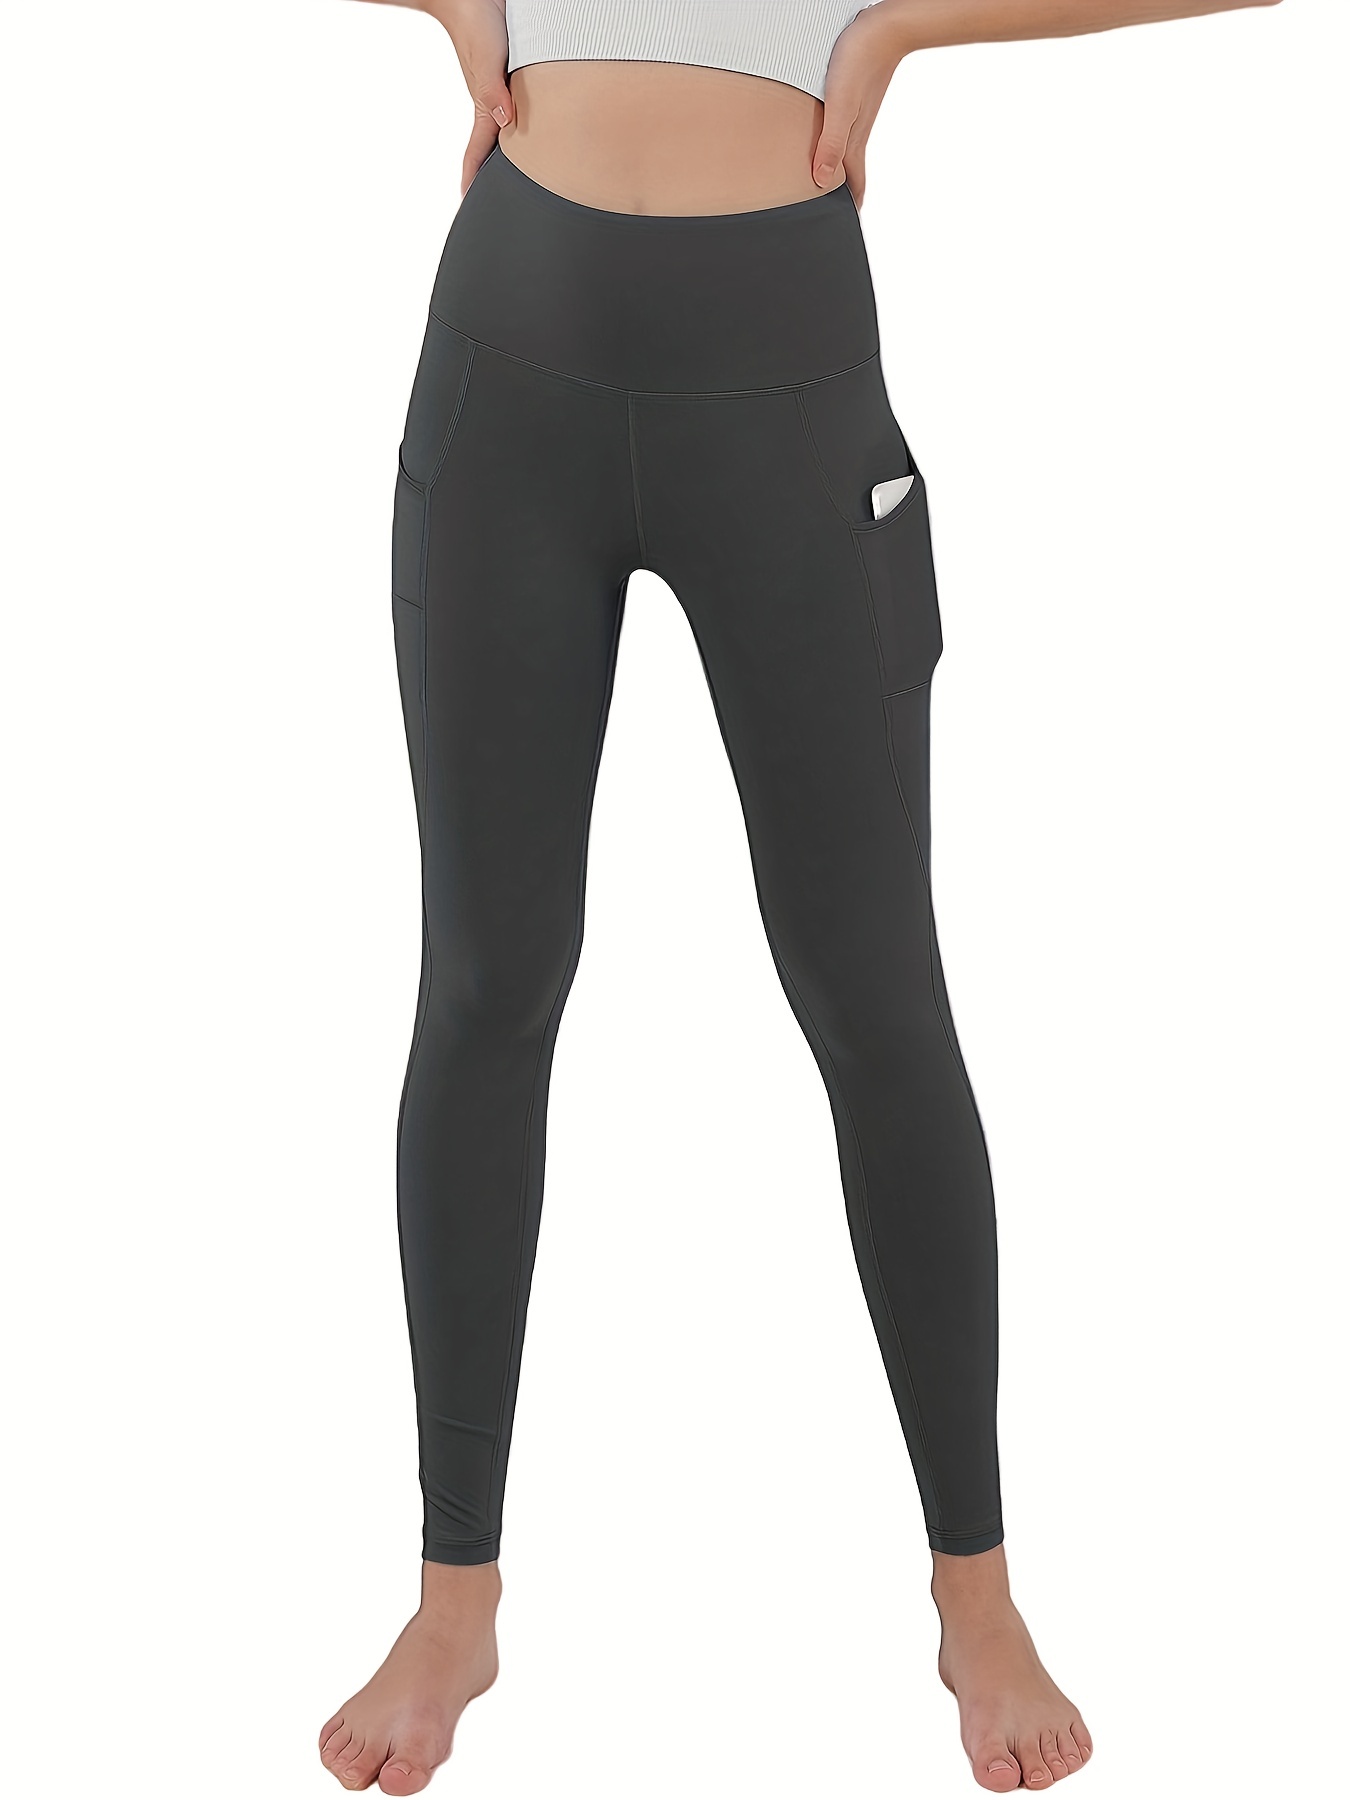 HDE Yoga Pants with Pockets for Women High Waisted Tummy Control Leggings  (Black, M) price in UAE,  UAE